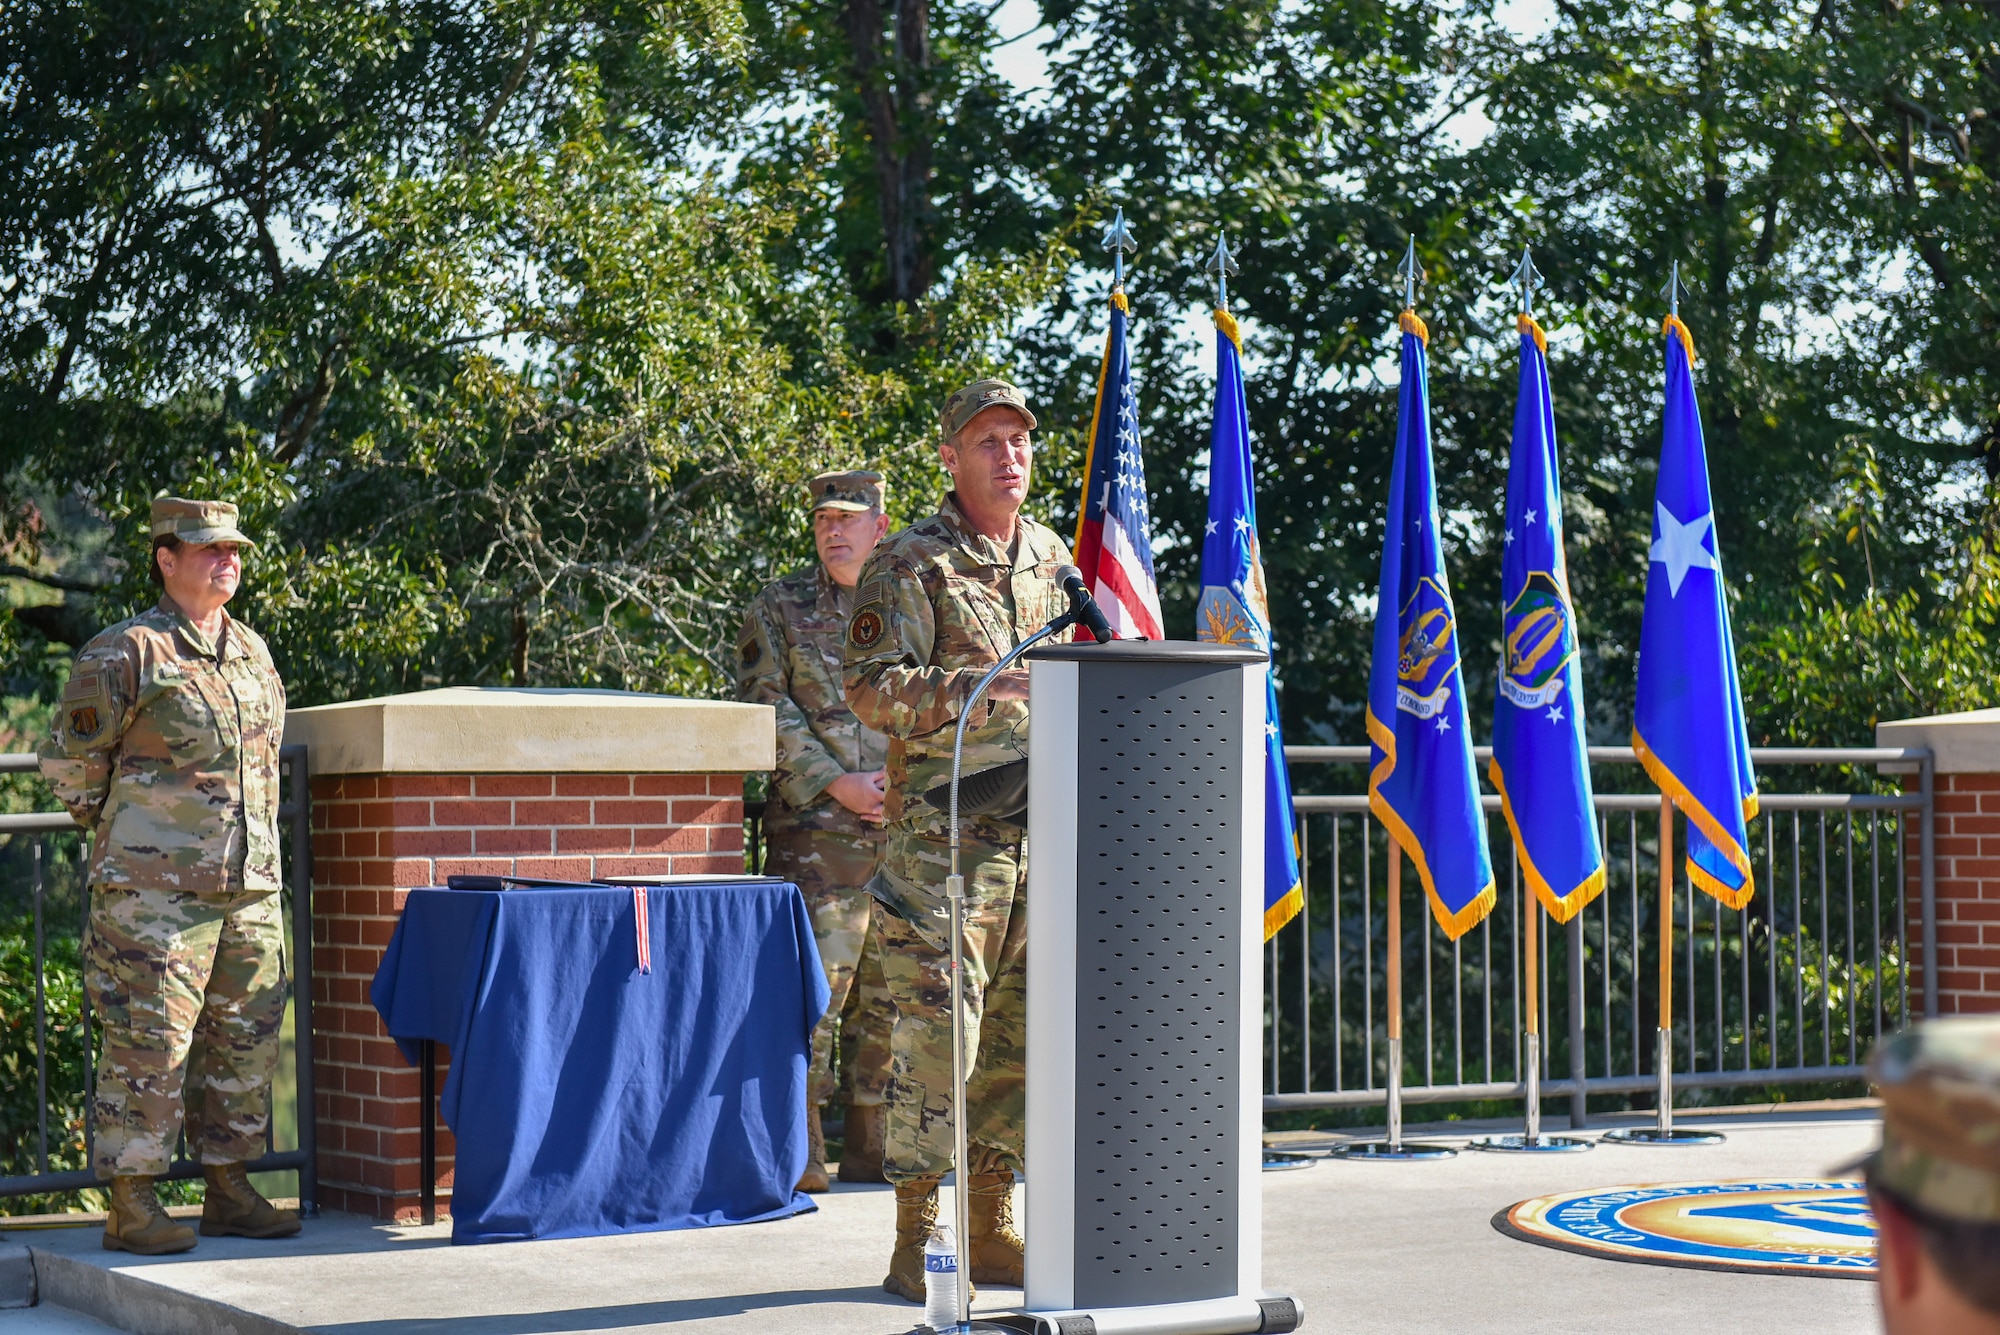 Maj. Gen. Matthew J. Burger, deputy commander of Air Force Reserve Command, gives remarks during a ceremony celebrating the 10th anniversary of AFRC's Force Generation Center at Robins Air Force Base, Georgia, Oct. 1, 2021. The FGC is the single organization responsible for generating Air Force Reserve forces by leveraging Reserve strategic capability to meet operational needs in support of the global force. The Reserve Citizen Airmen who support the FGC perform all aspects of force generation to include oversight, visibility and accountability of more than 70,000 Air Force Reserve forces. (U.S. Air Force photo by Misuzu Allen)